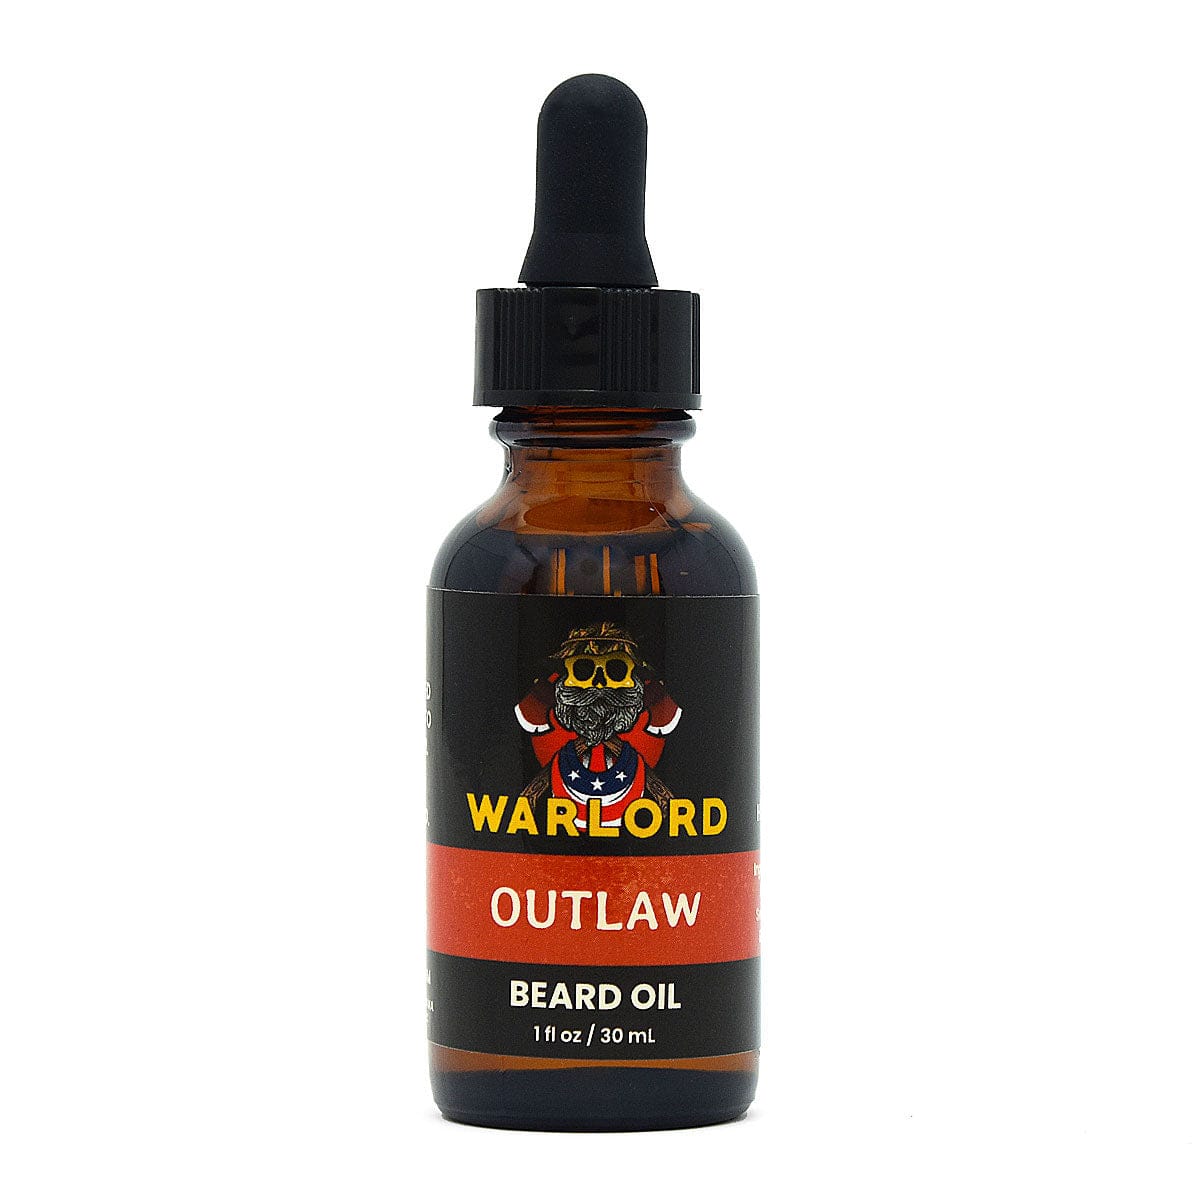 Outlaw Beard Oil - Warlord - Men's Grooming Essentials